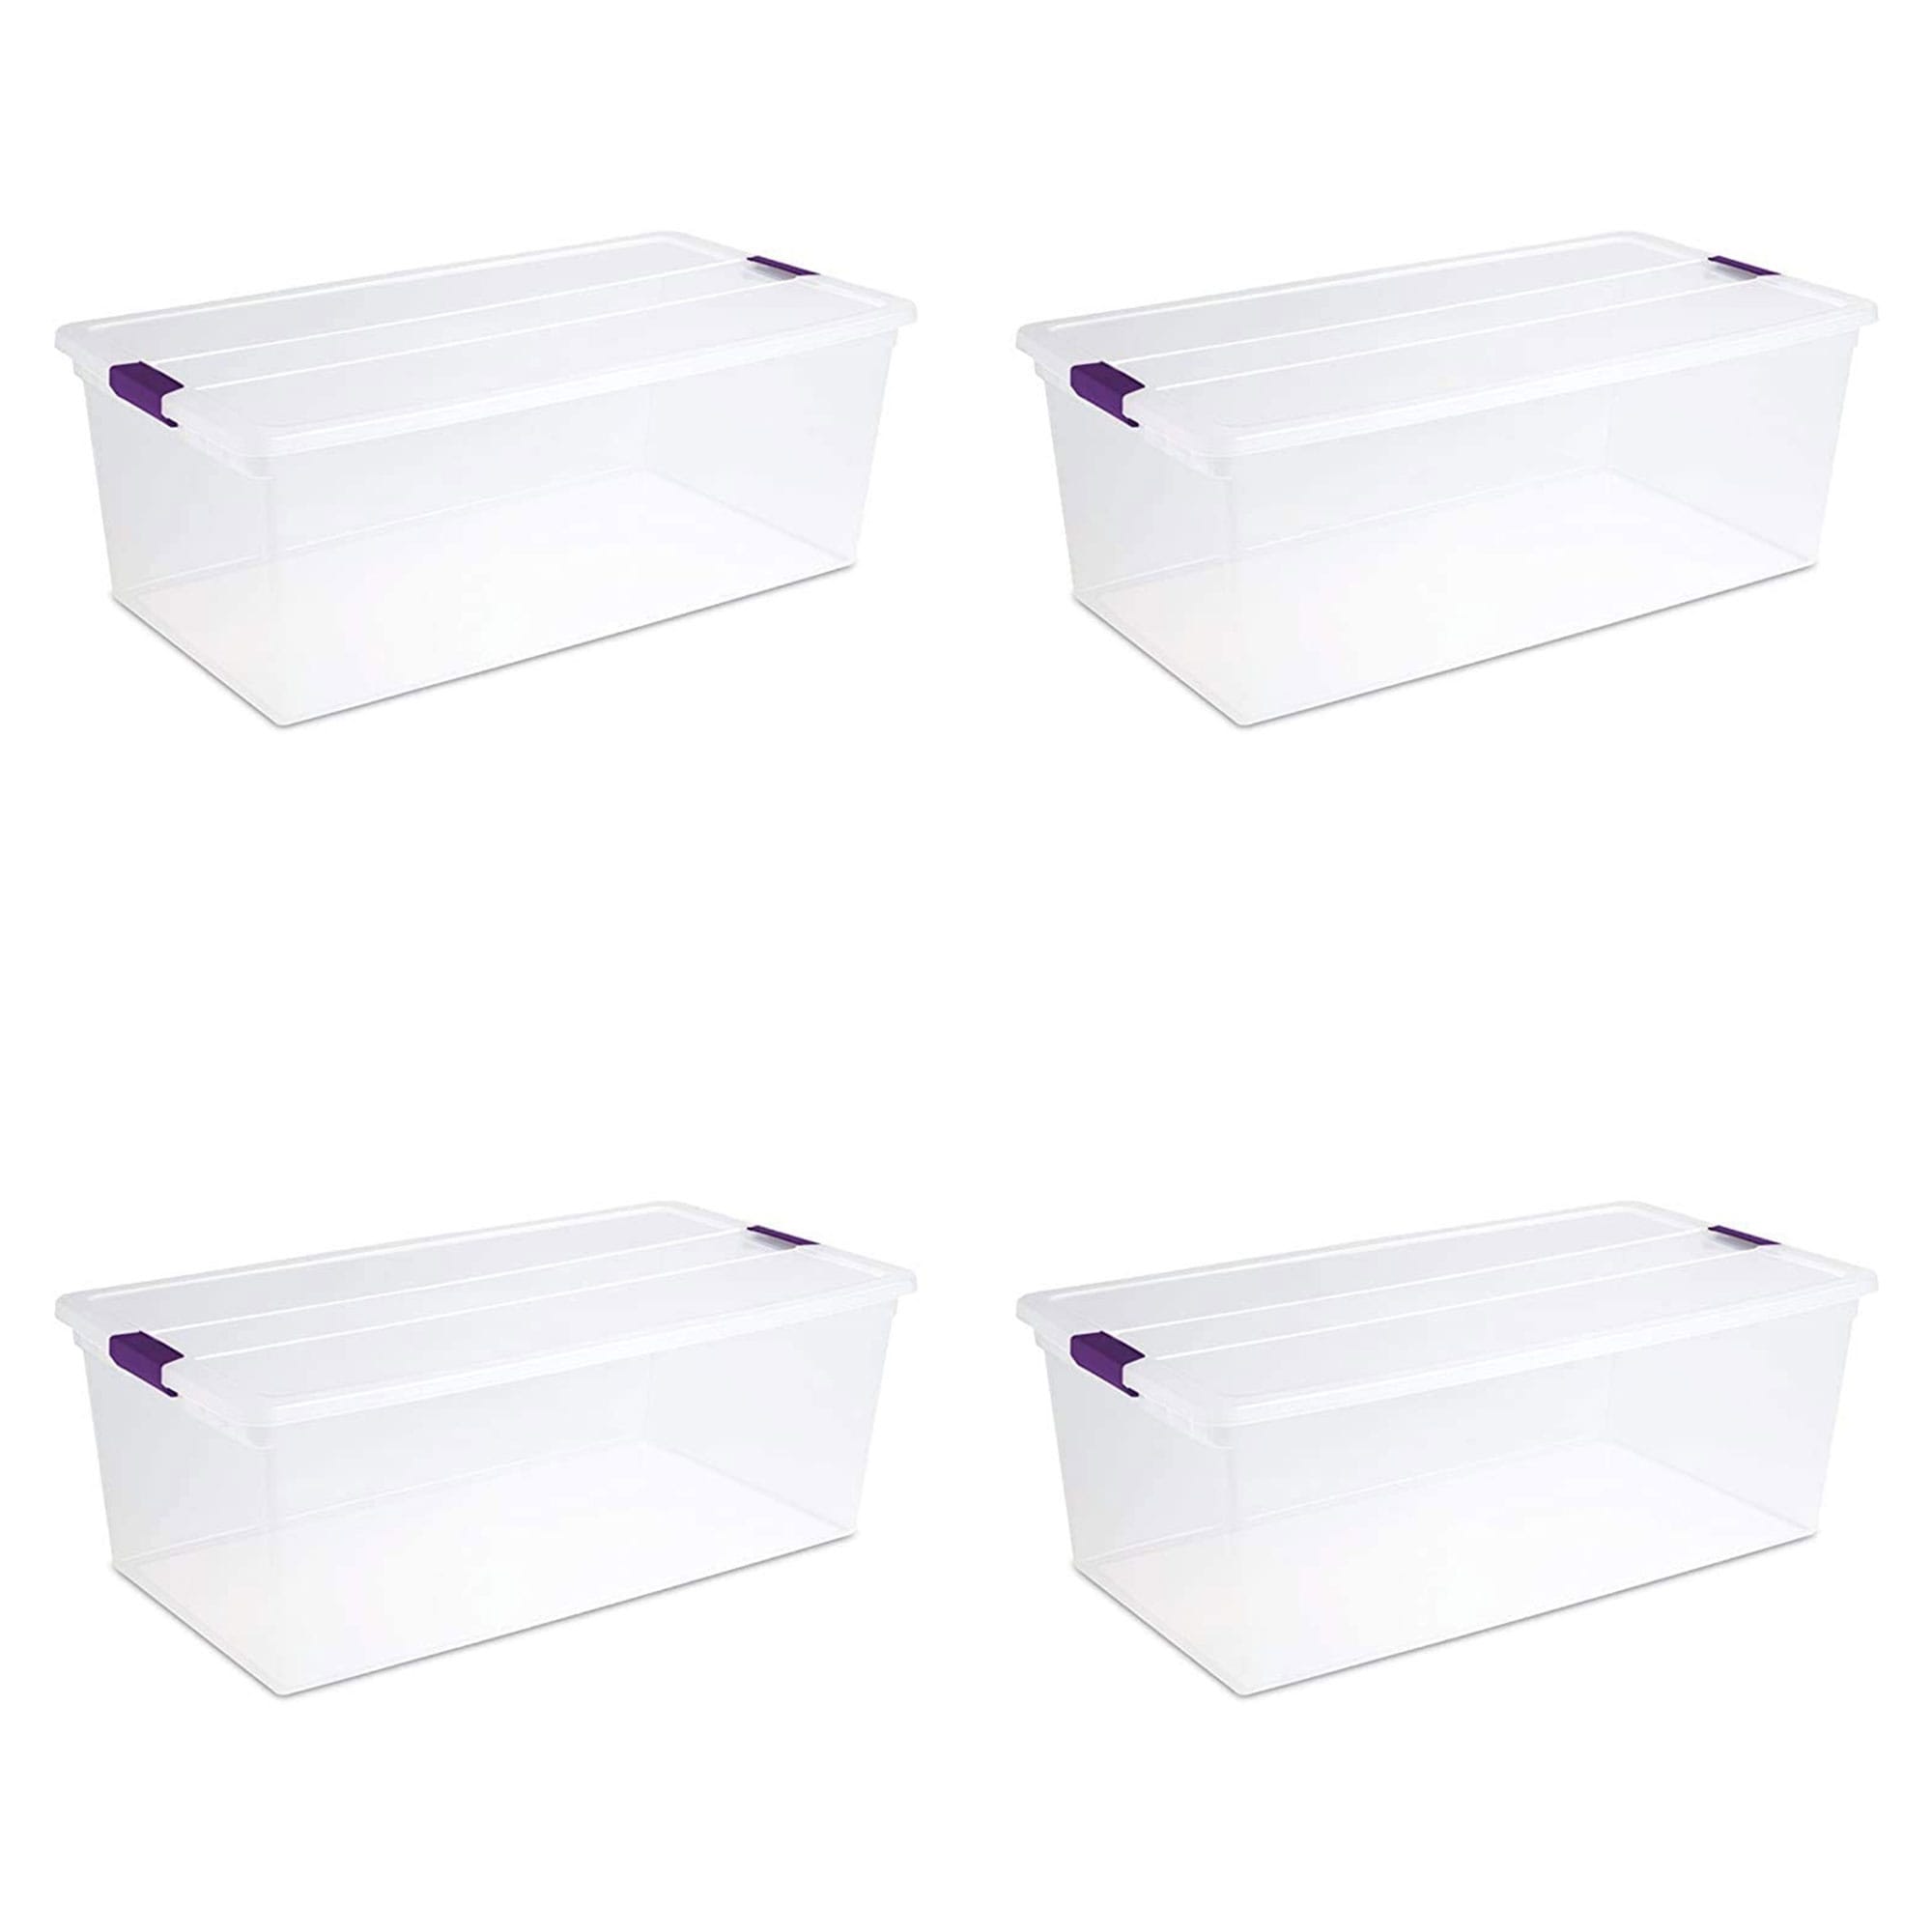 https://ak1.ostkcdn.com/images/products/is/images/direct/9c914124b9571021560ad8a6ac266974fc854209/Sterilite-110-Quart-Capacity-Clear-Storage-Tote-w--Secure-Latch-Handles-%284-Pack%29.jpg